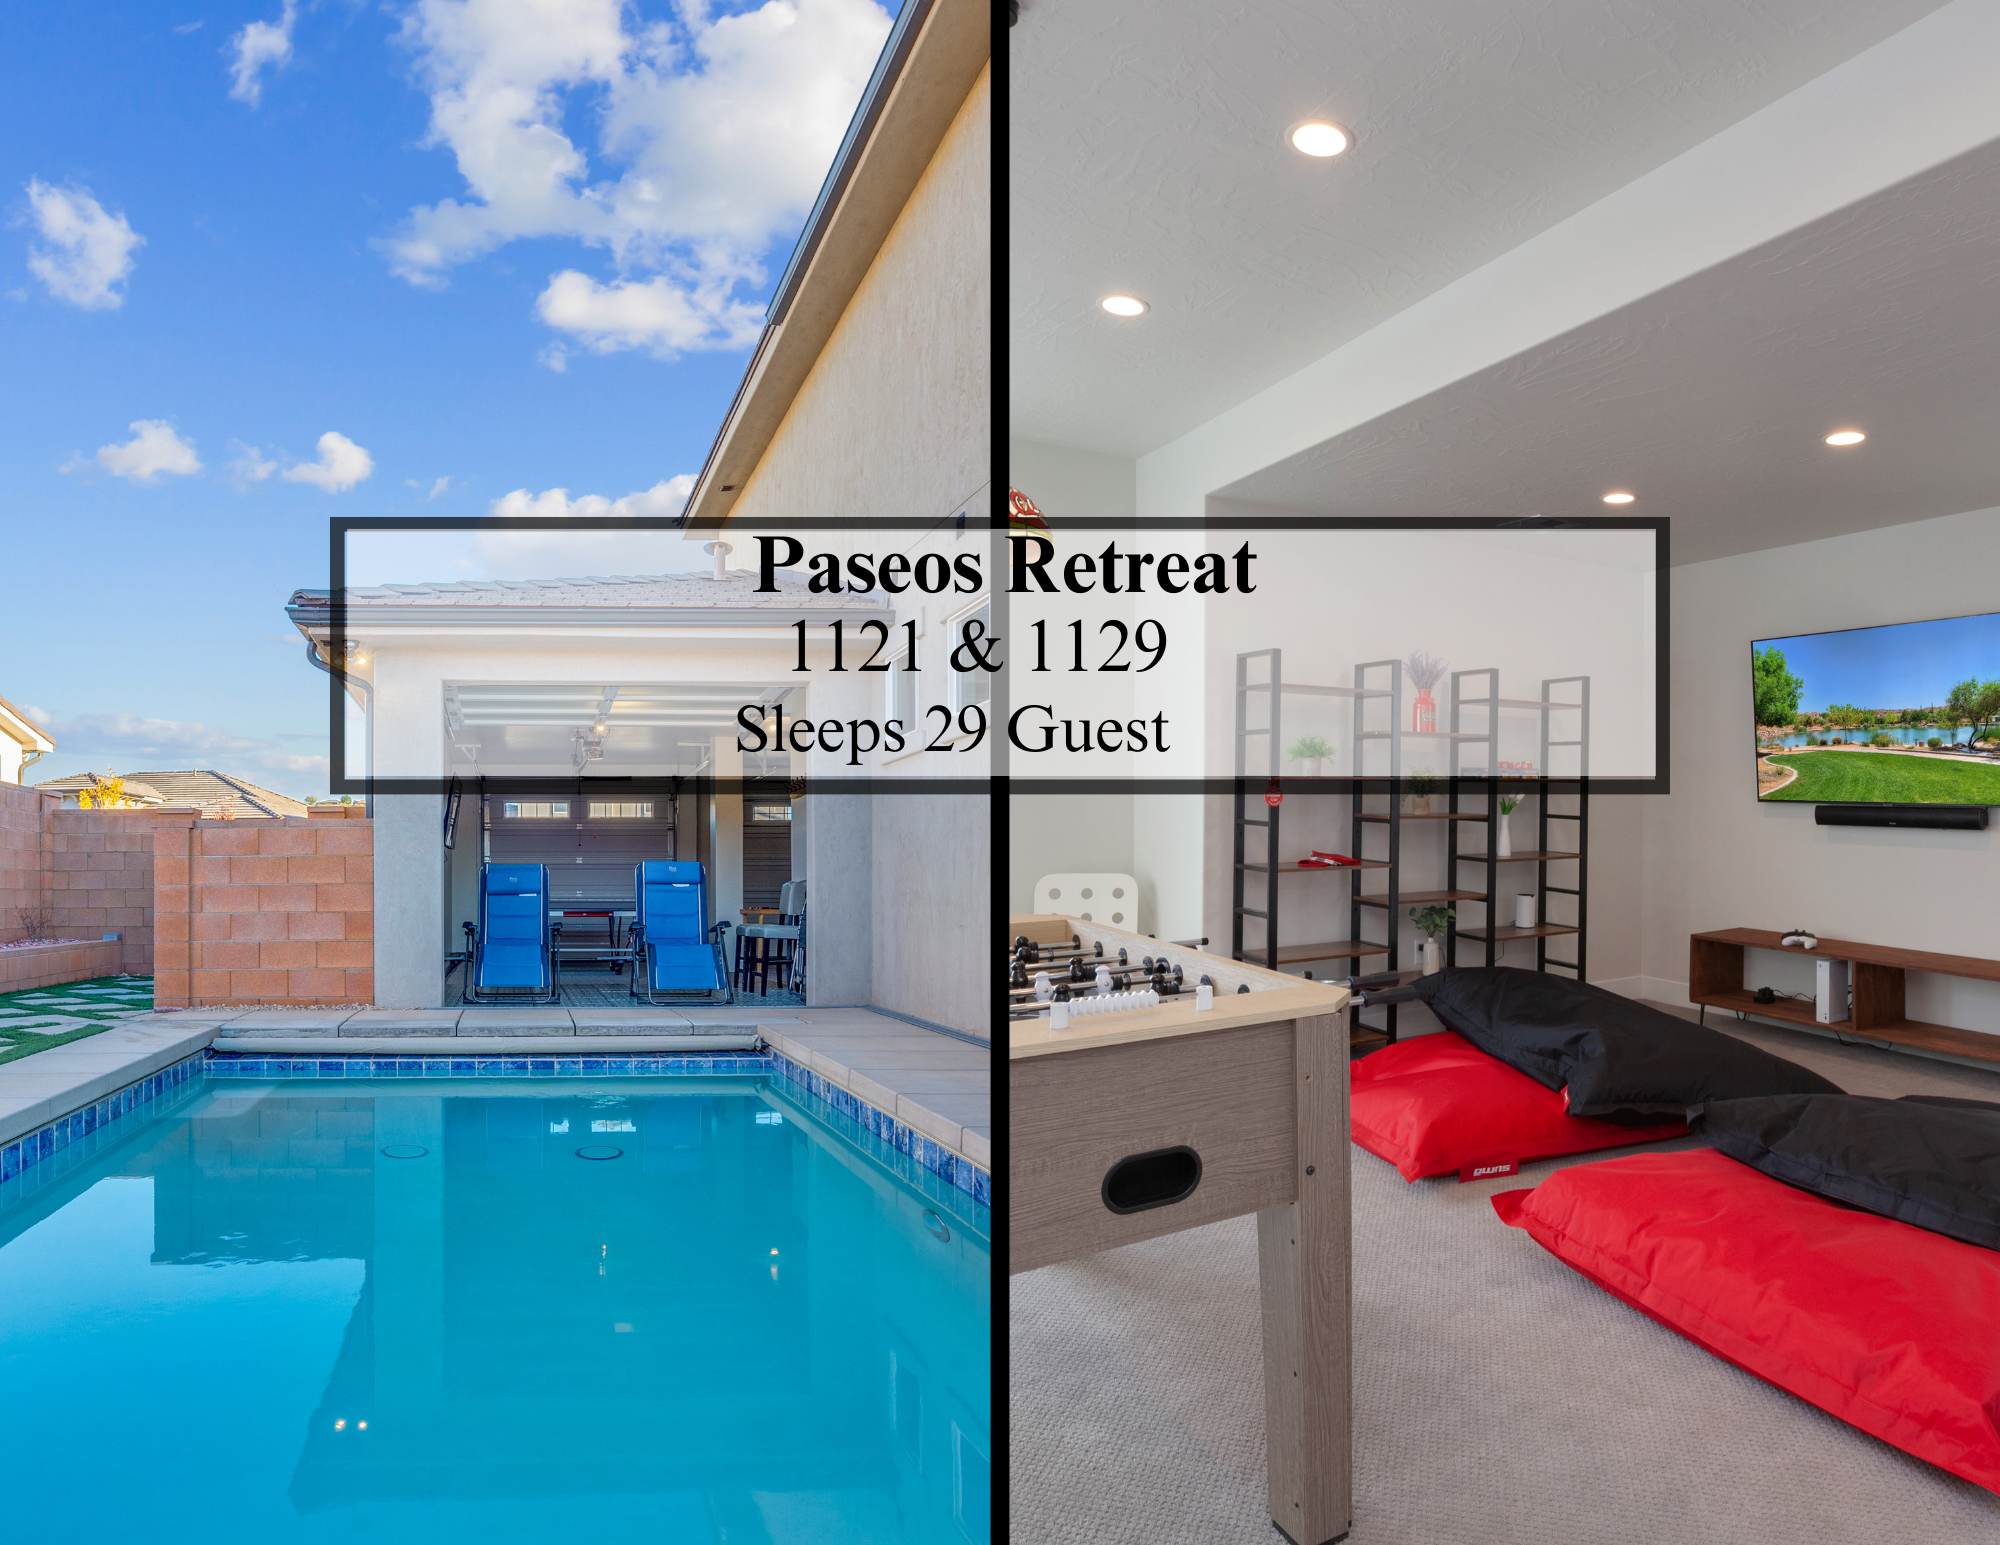 Paseos Retreat | Sleeps 29, Private Pool, Hot Tub, BBQ, Ping Pong Table, Gaming Consoles and more!